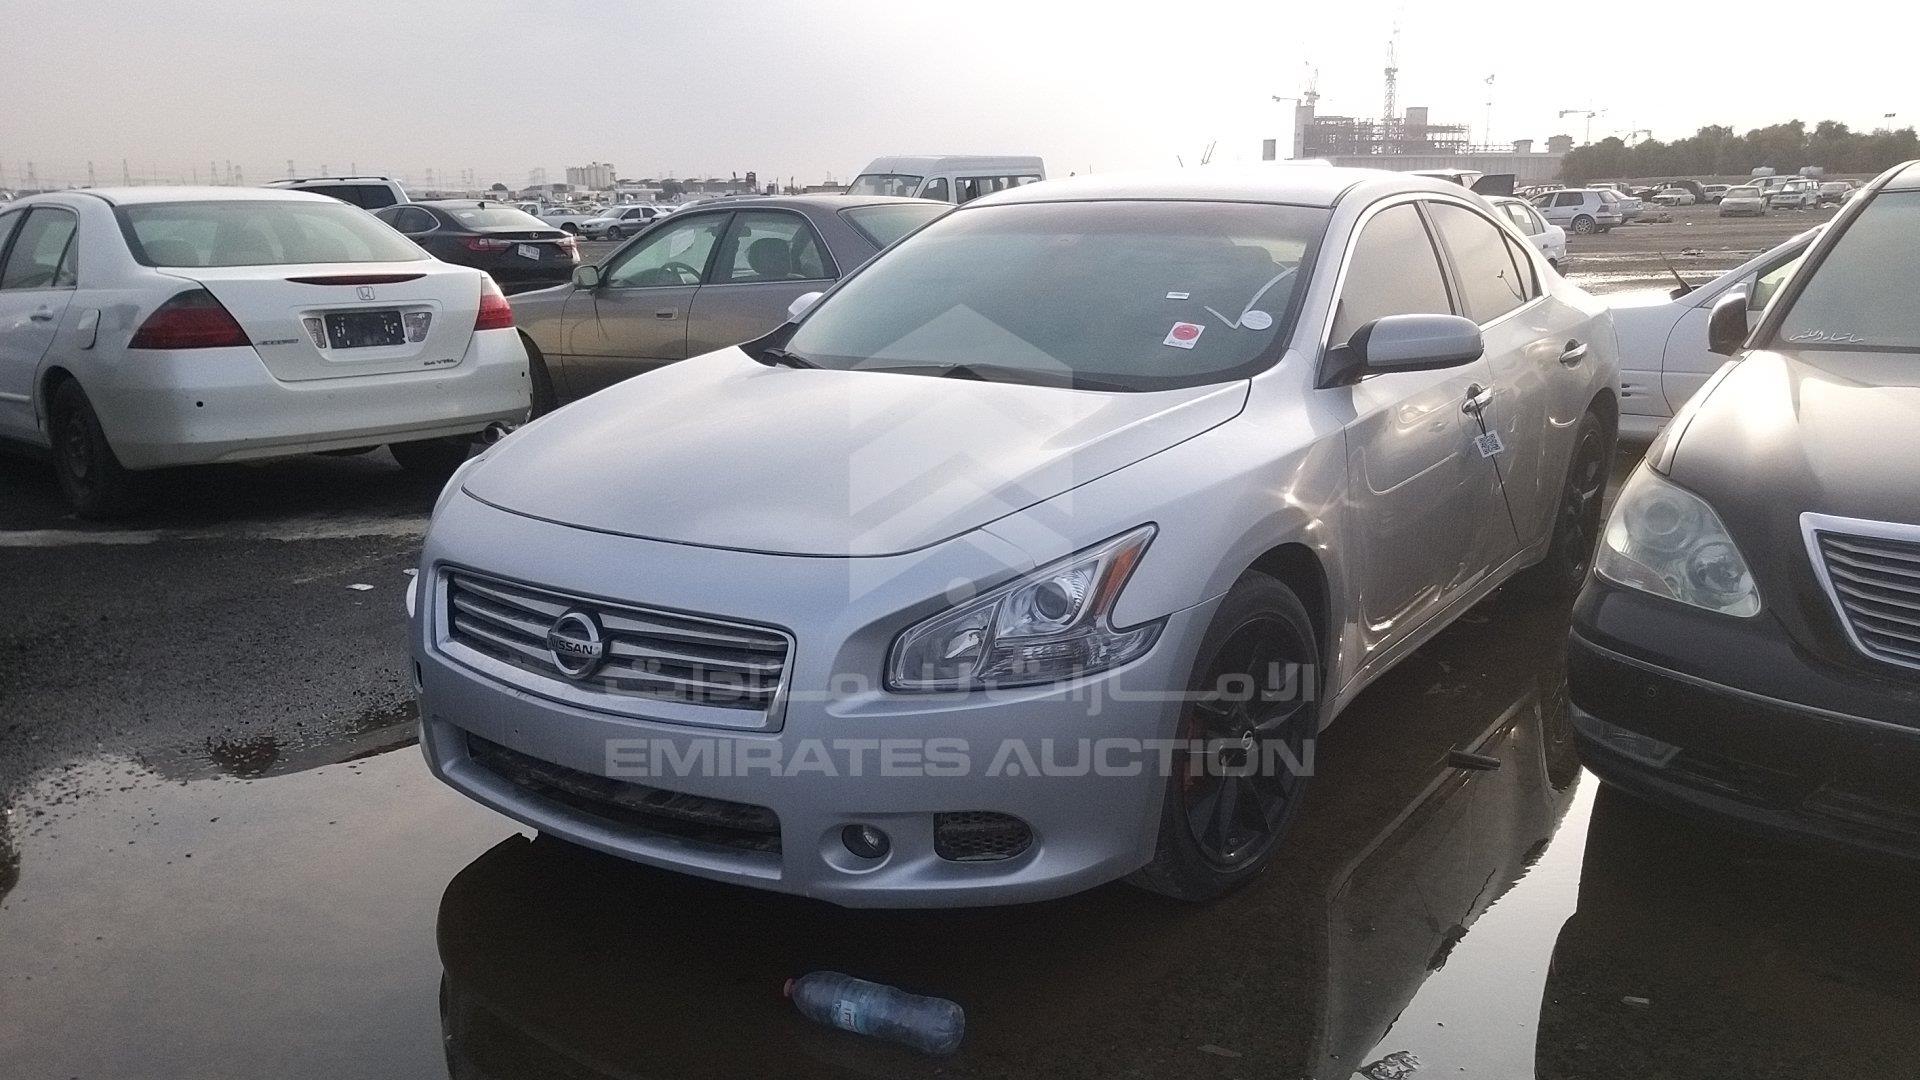 image 7 1 - more than 1000 used cars in emirates auction